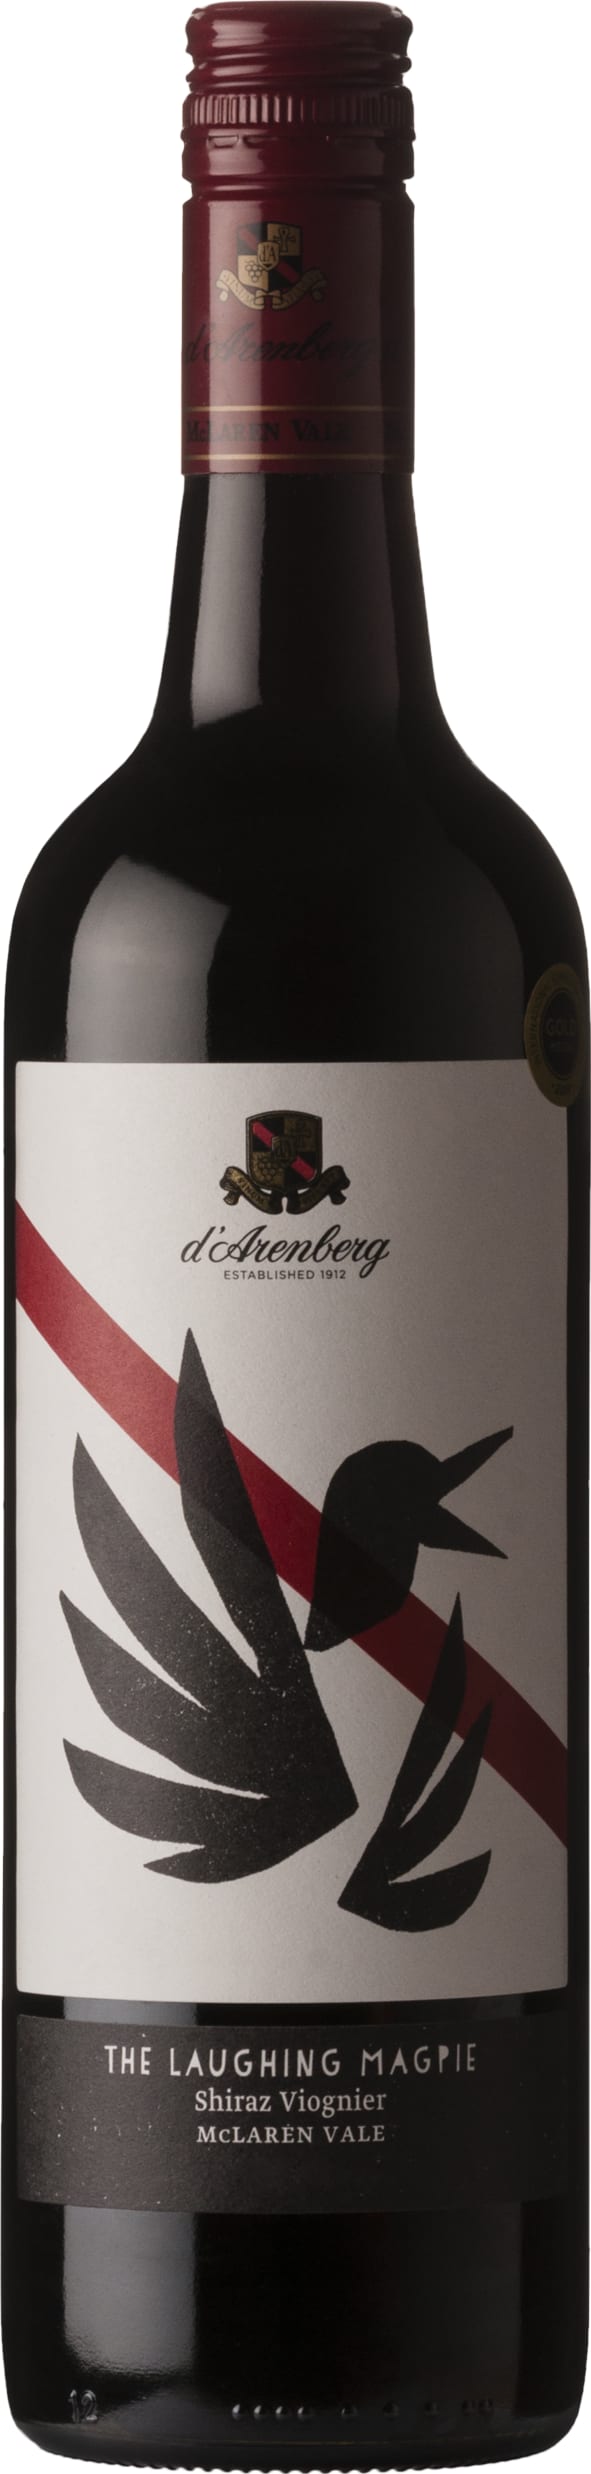 D Arenberg The Laughing Magpie 2018 75cl - Buy D Arenberg Wines from GREAT WINES DIRECT wine shop